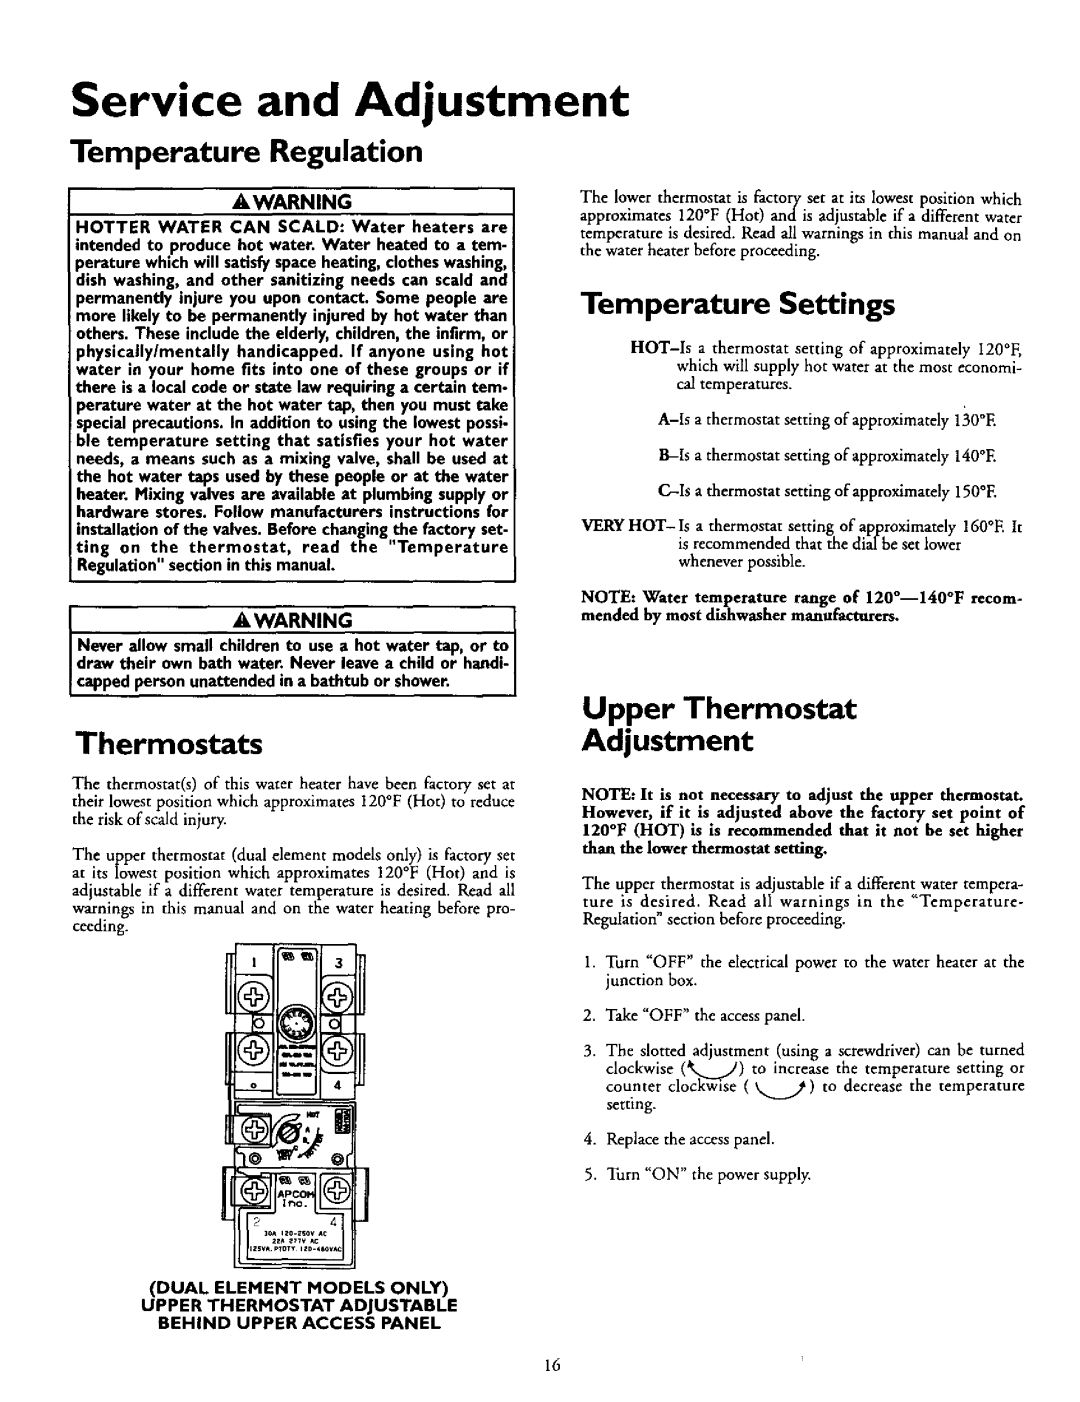 Kenmore 153.327464 Service and Adjustment, Temperature Regulation, Upper Thermostat Adjustment, Temperature Settings 